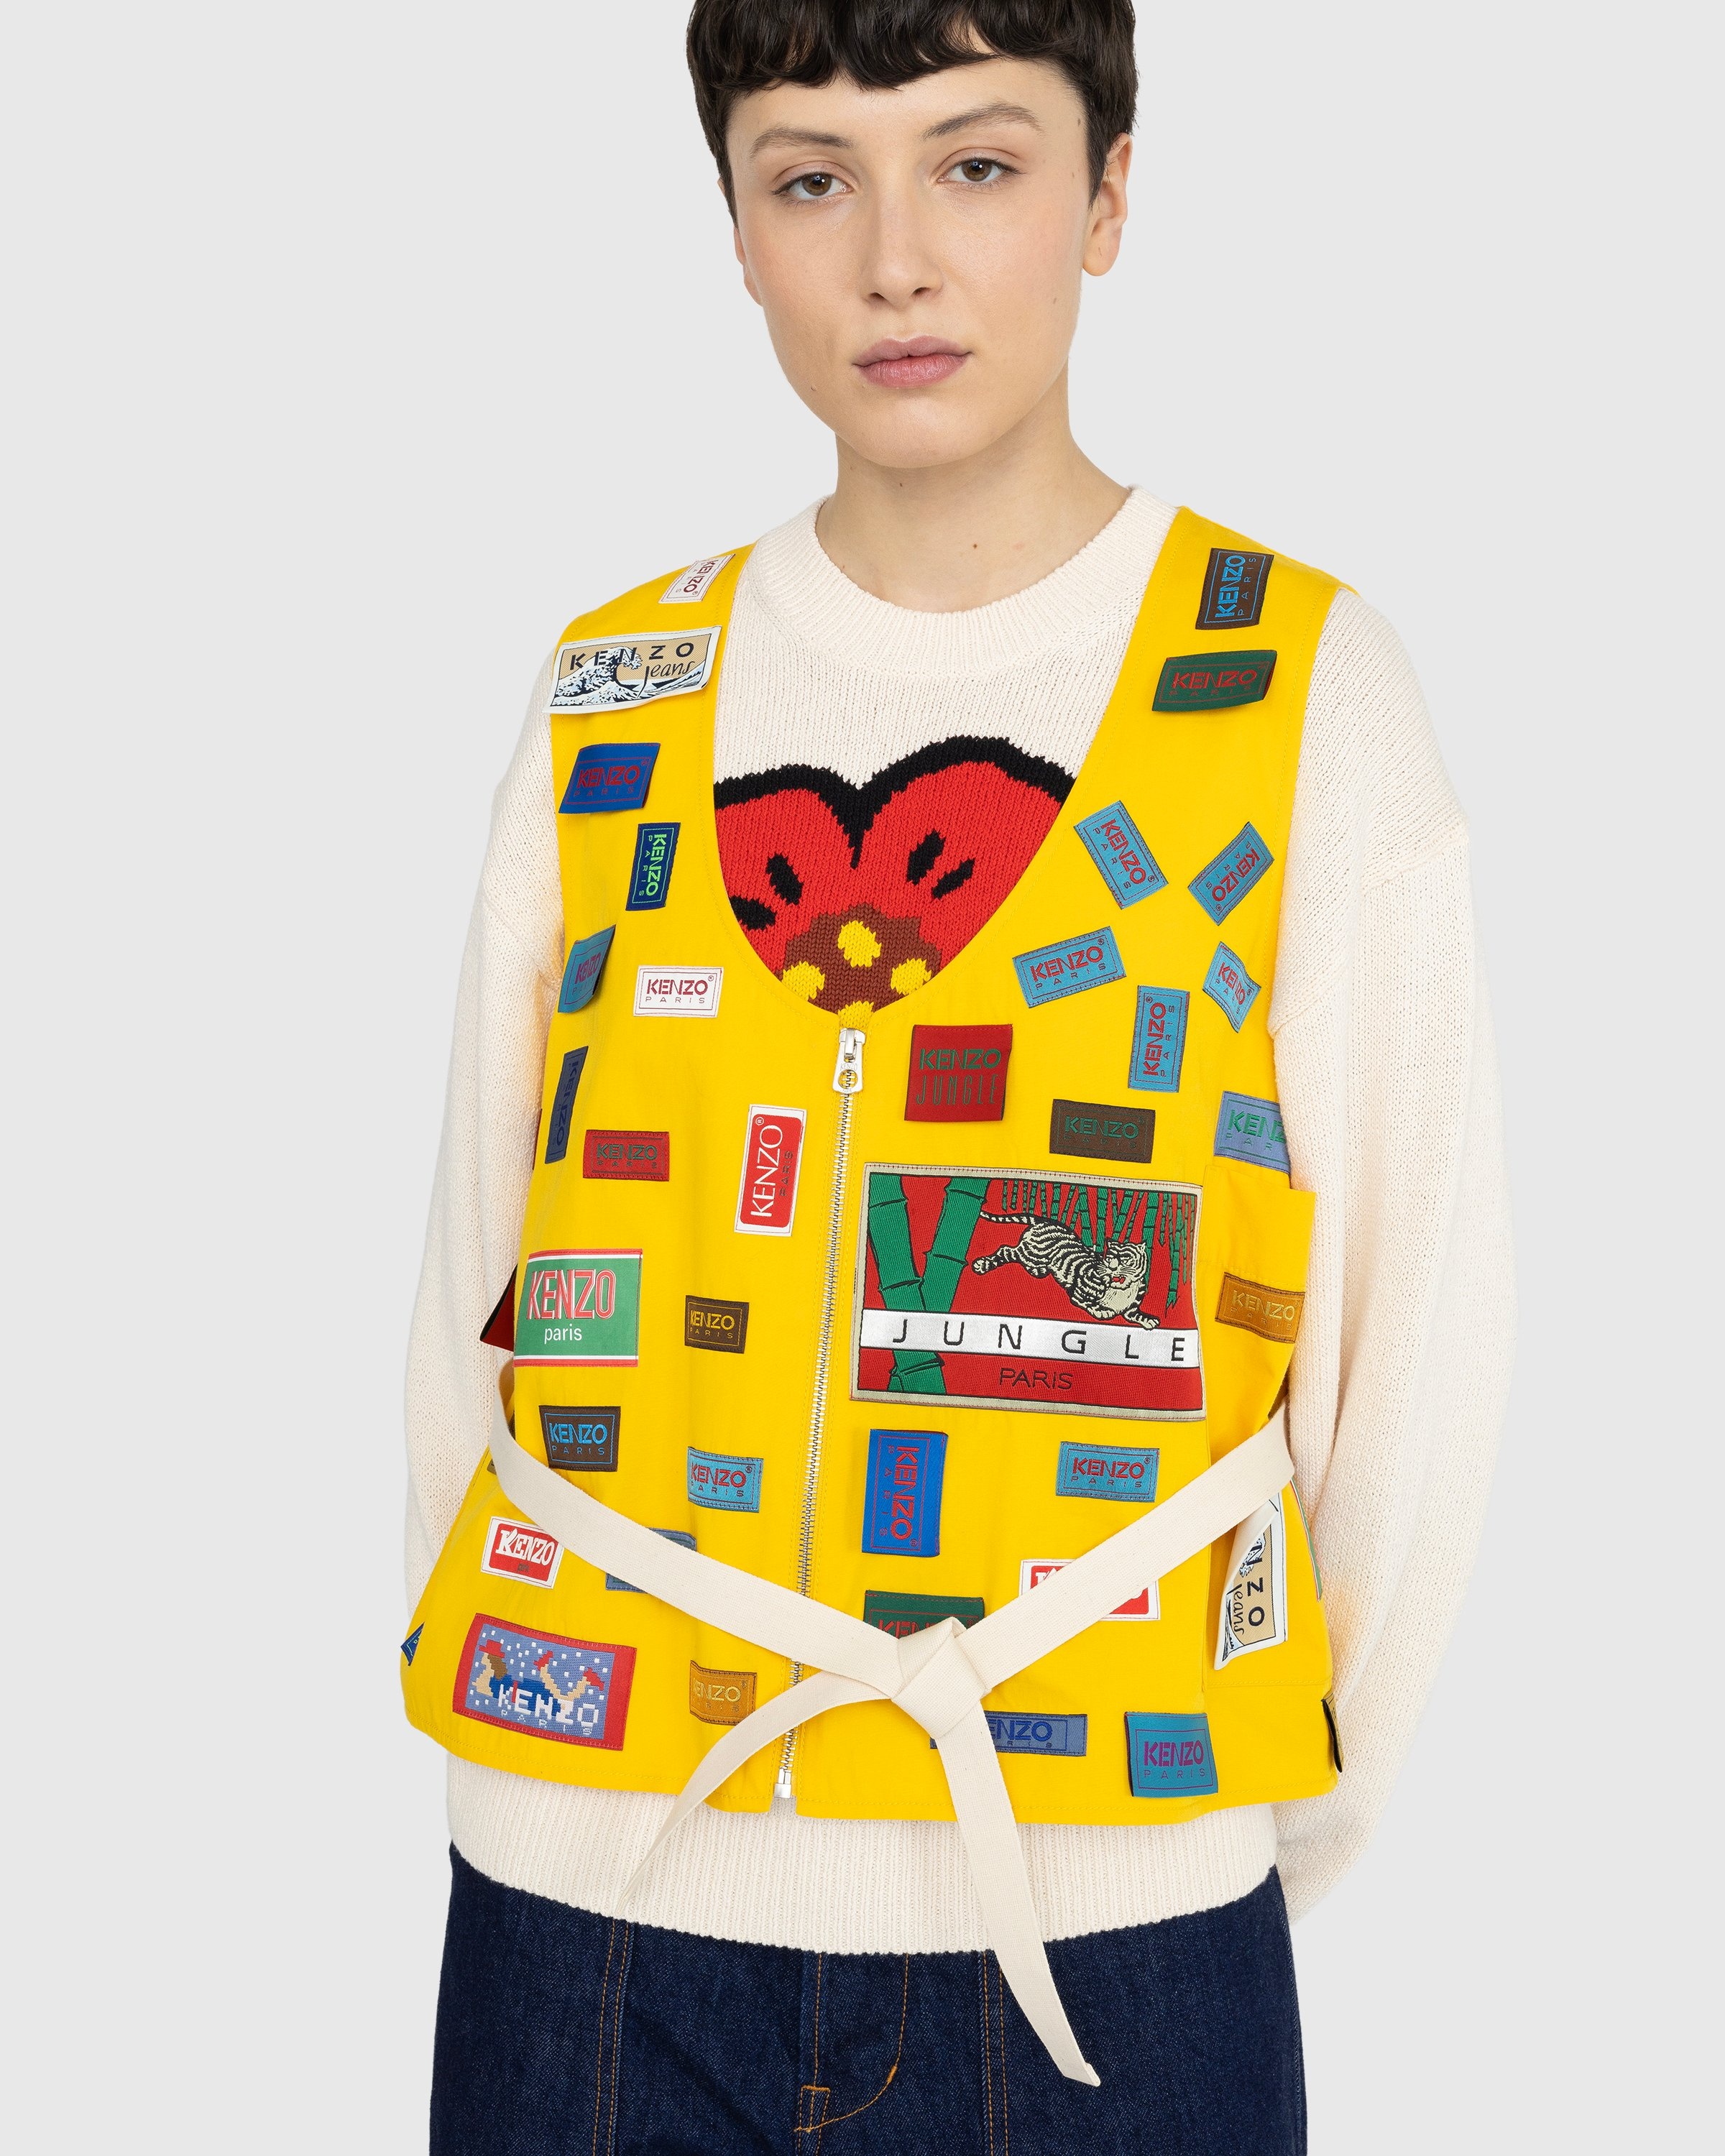 Kenzo – ‘Archives Labels’ Vest - Outerwear - Yellow - Image 5